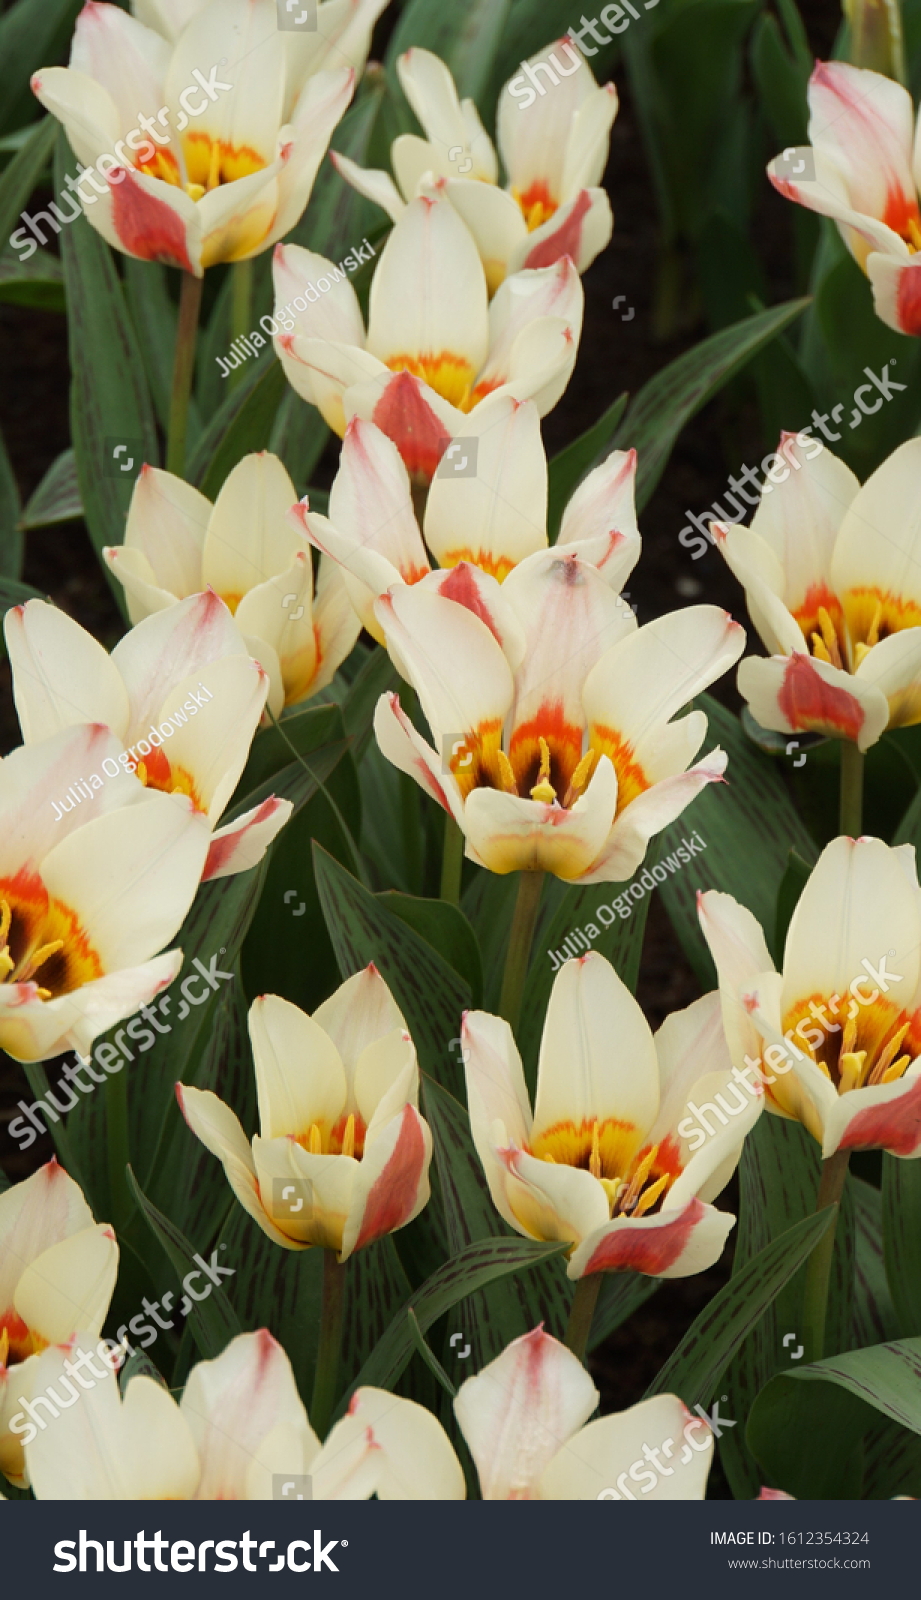 Beautiful White-Yellow Color Tulips, Green Leaves And Sun Light. Springtime Background. #1612354324